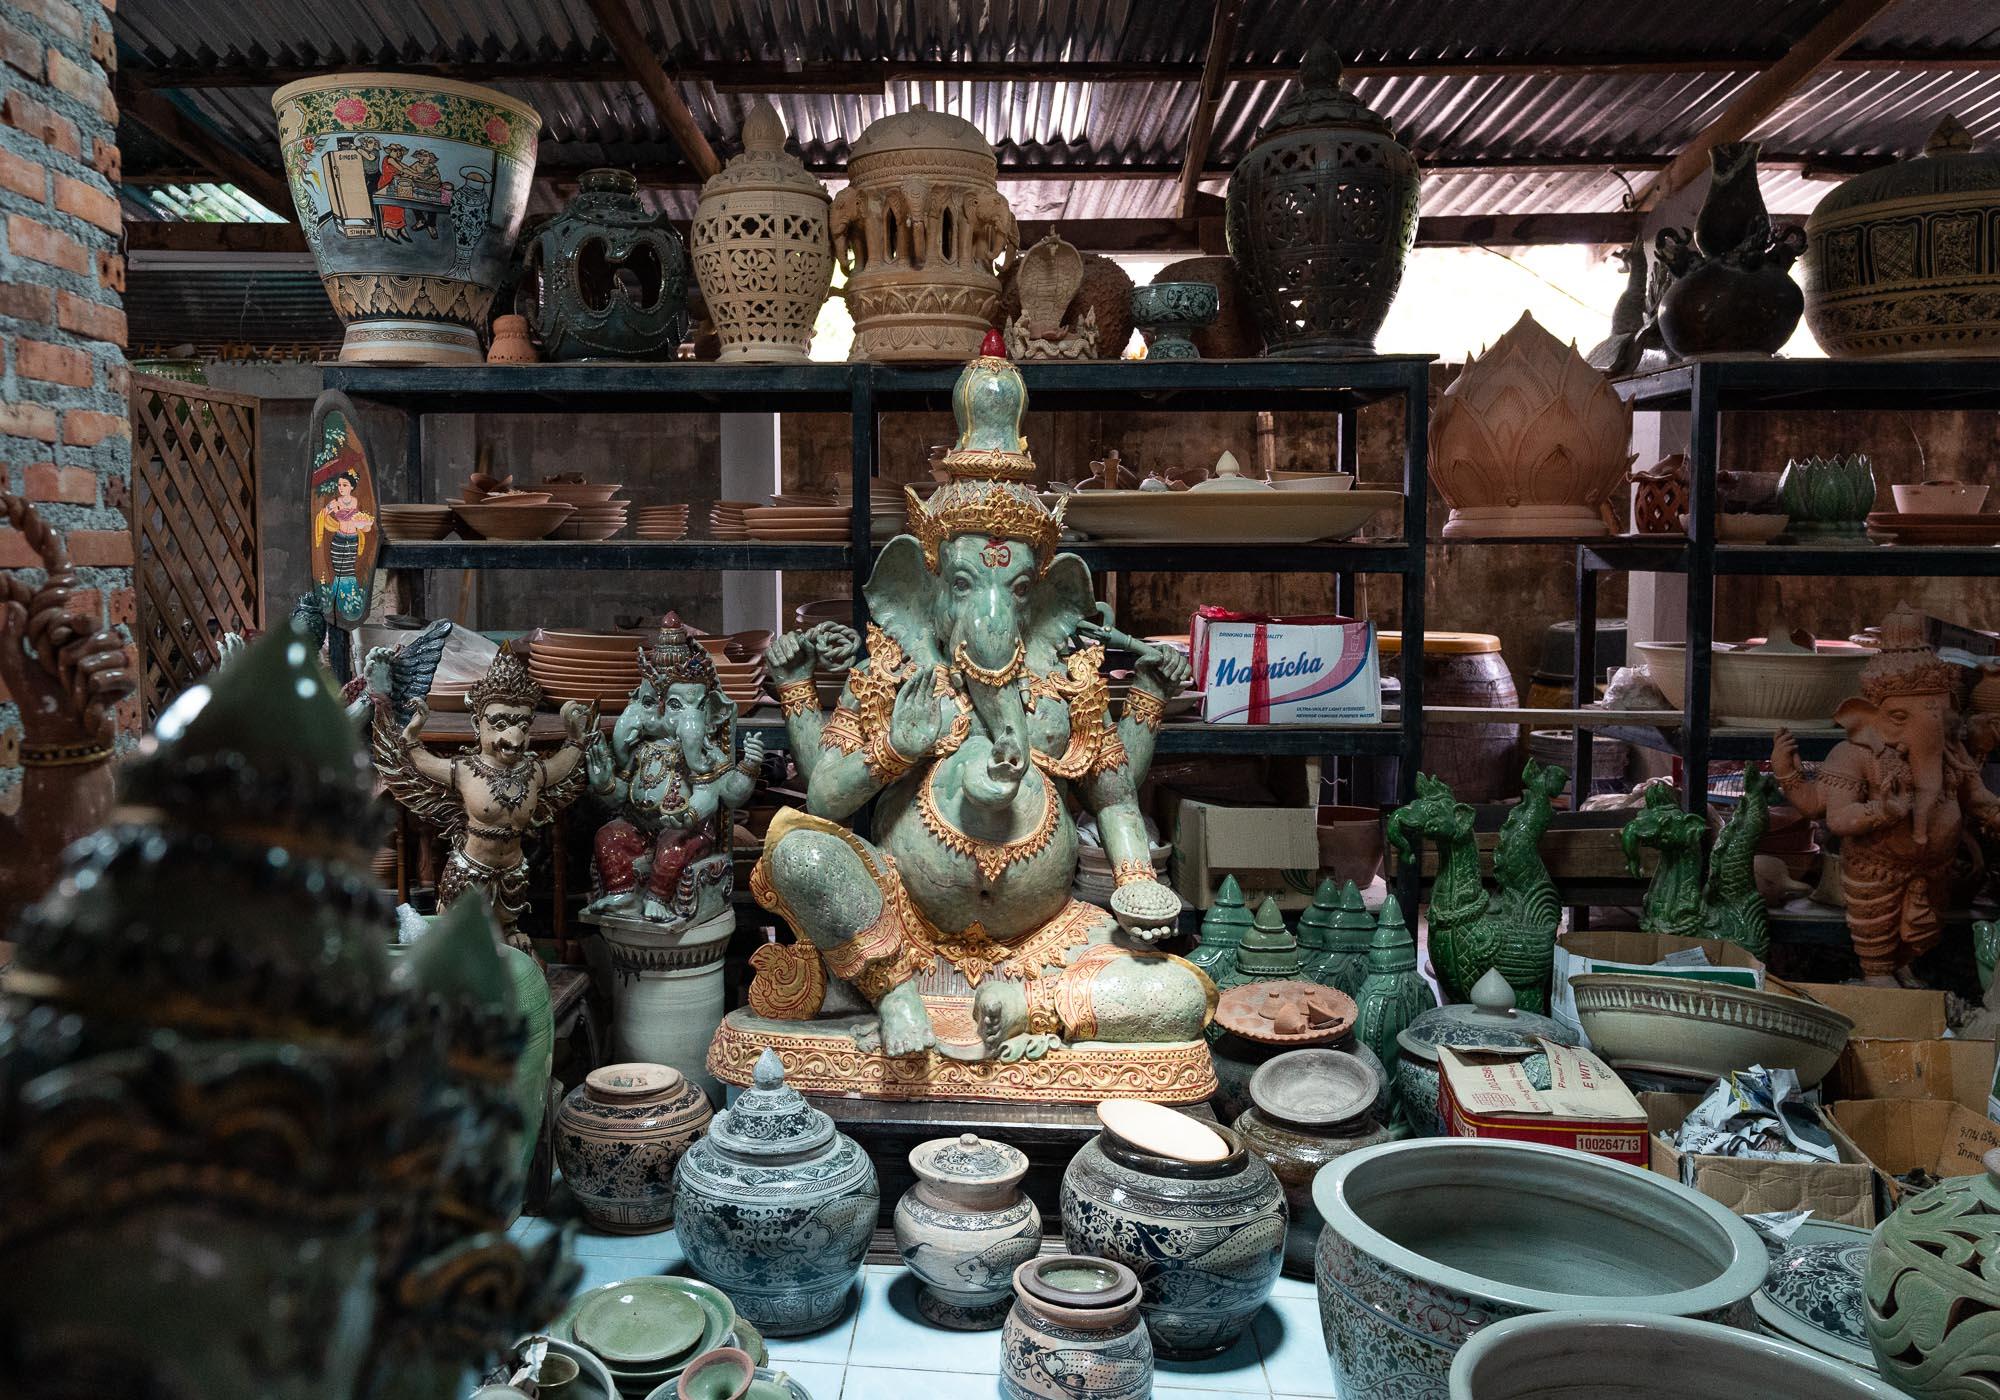 The ceramic products for sale in Sukhothai range from small items to large sculptures. – © Michael Turtle